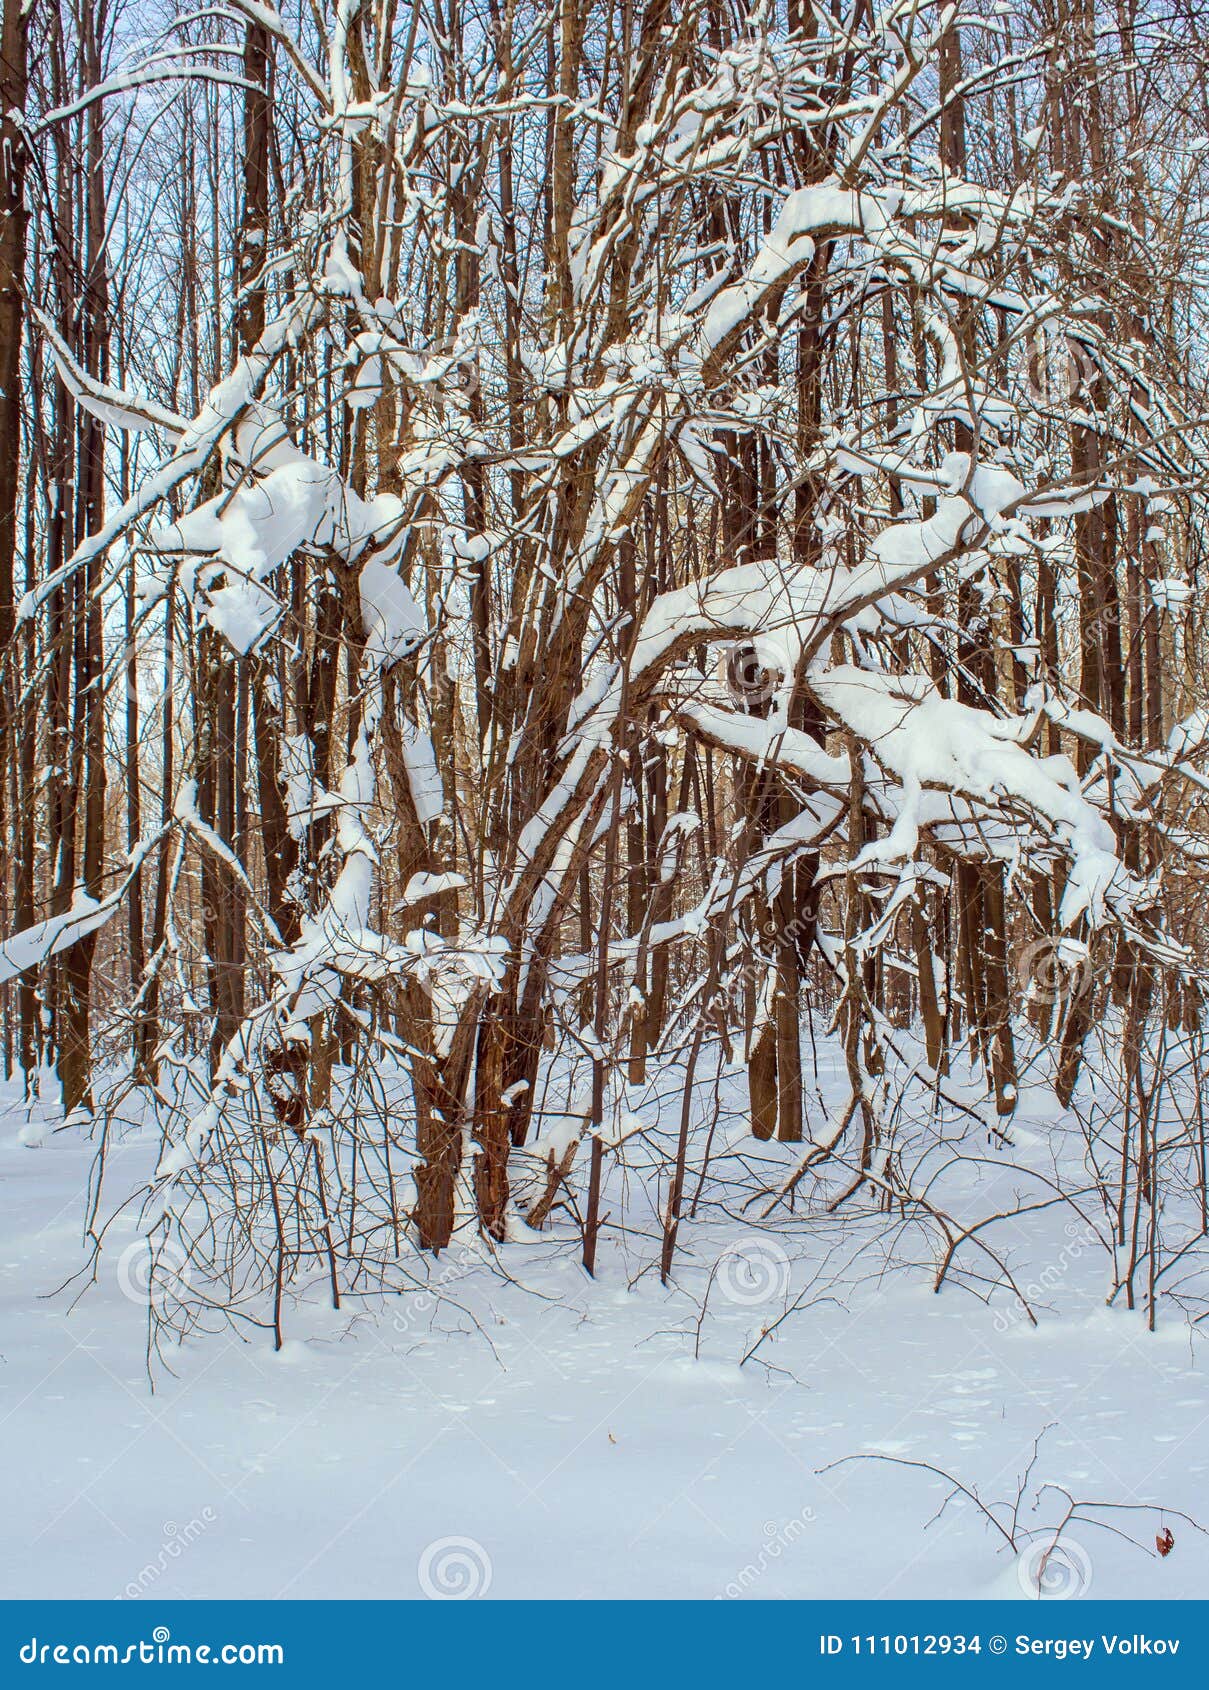 The Curved Branches of the Trees after a Snowfall Stock Photo - Image